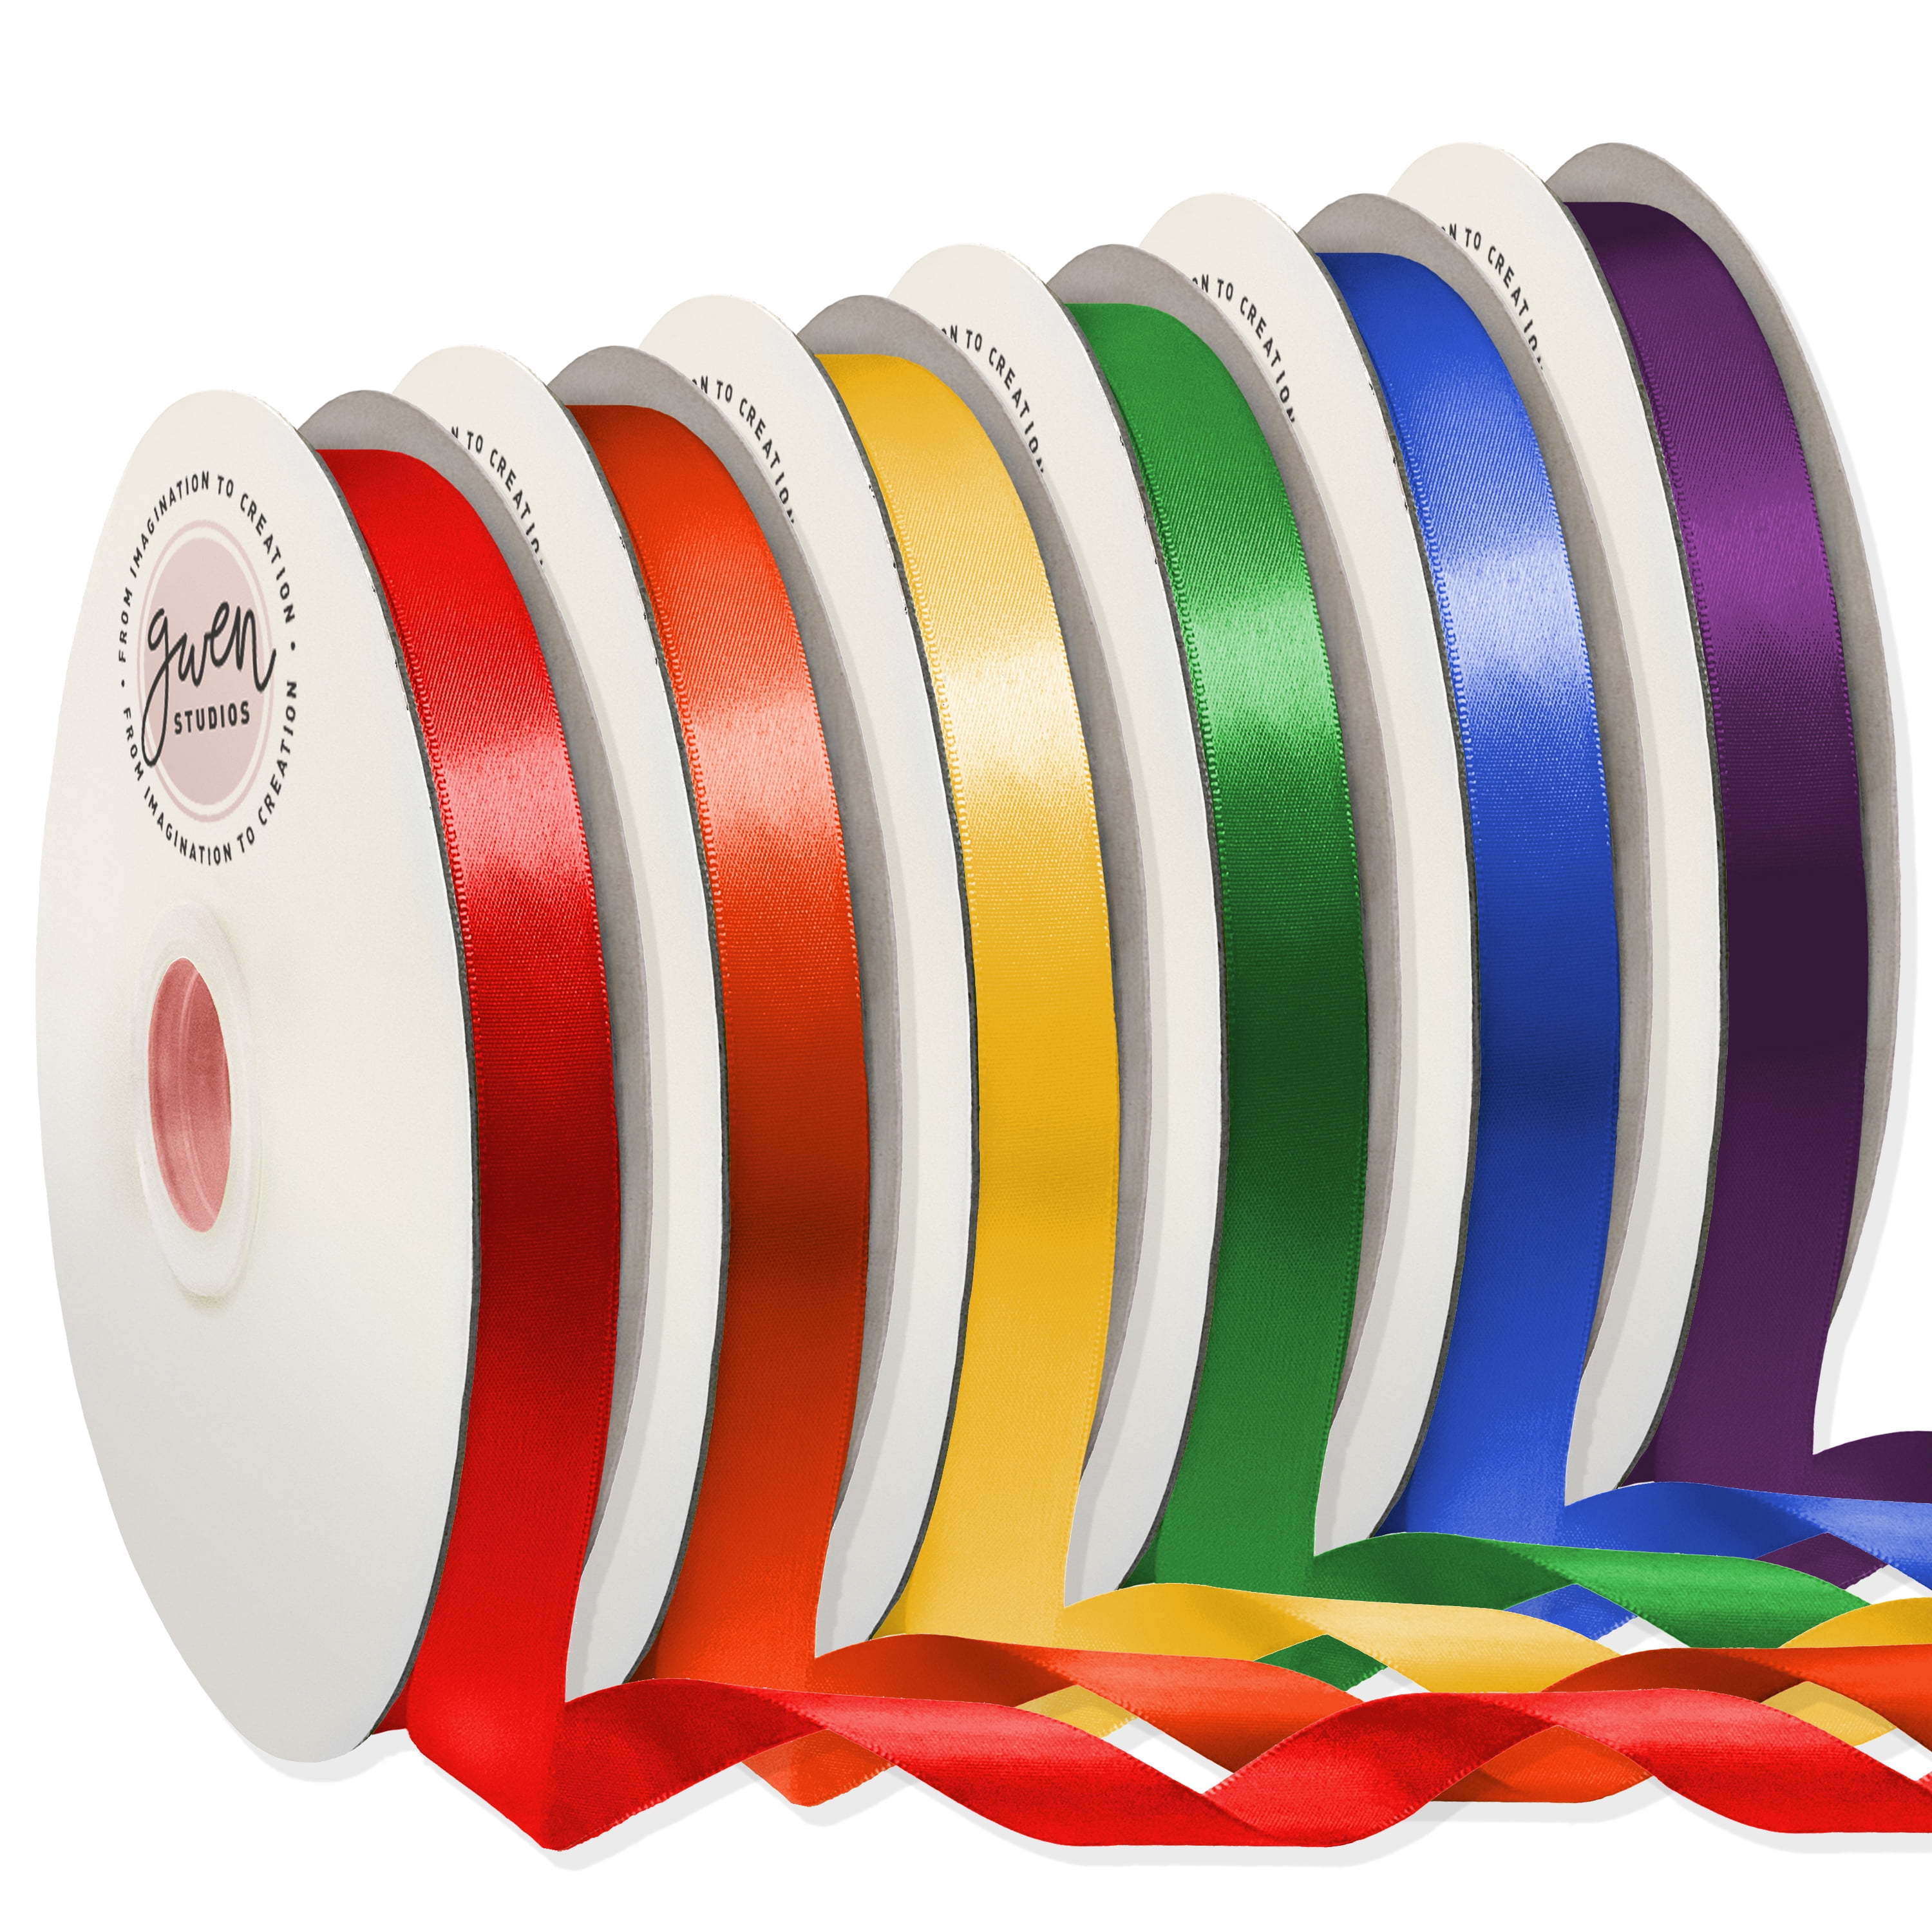 Double Faced Satin Rainbow Ribbon Pack, 6 Colors, 3/8 inch x 600 Yards by Gwen Studios